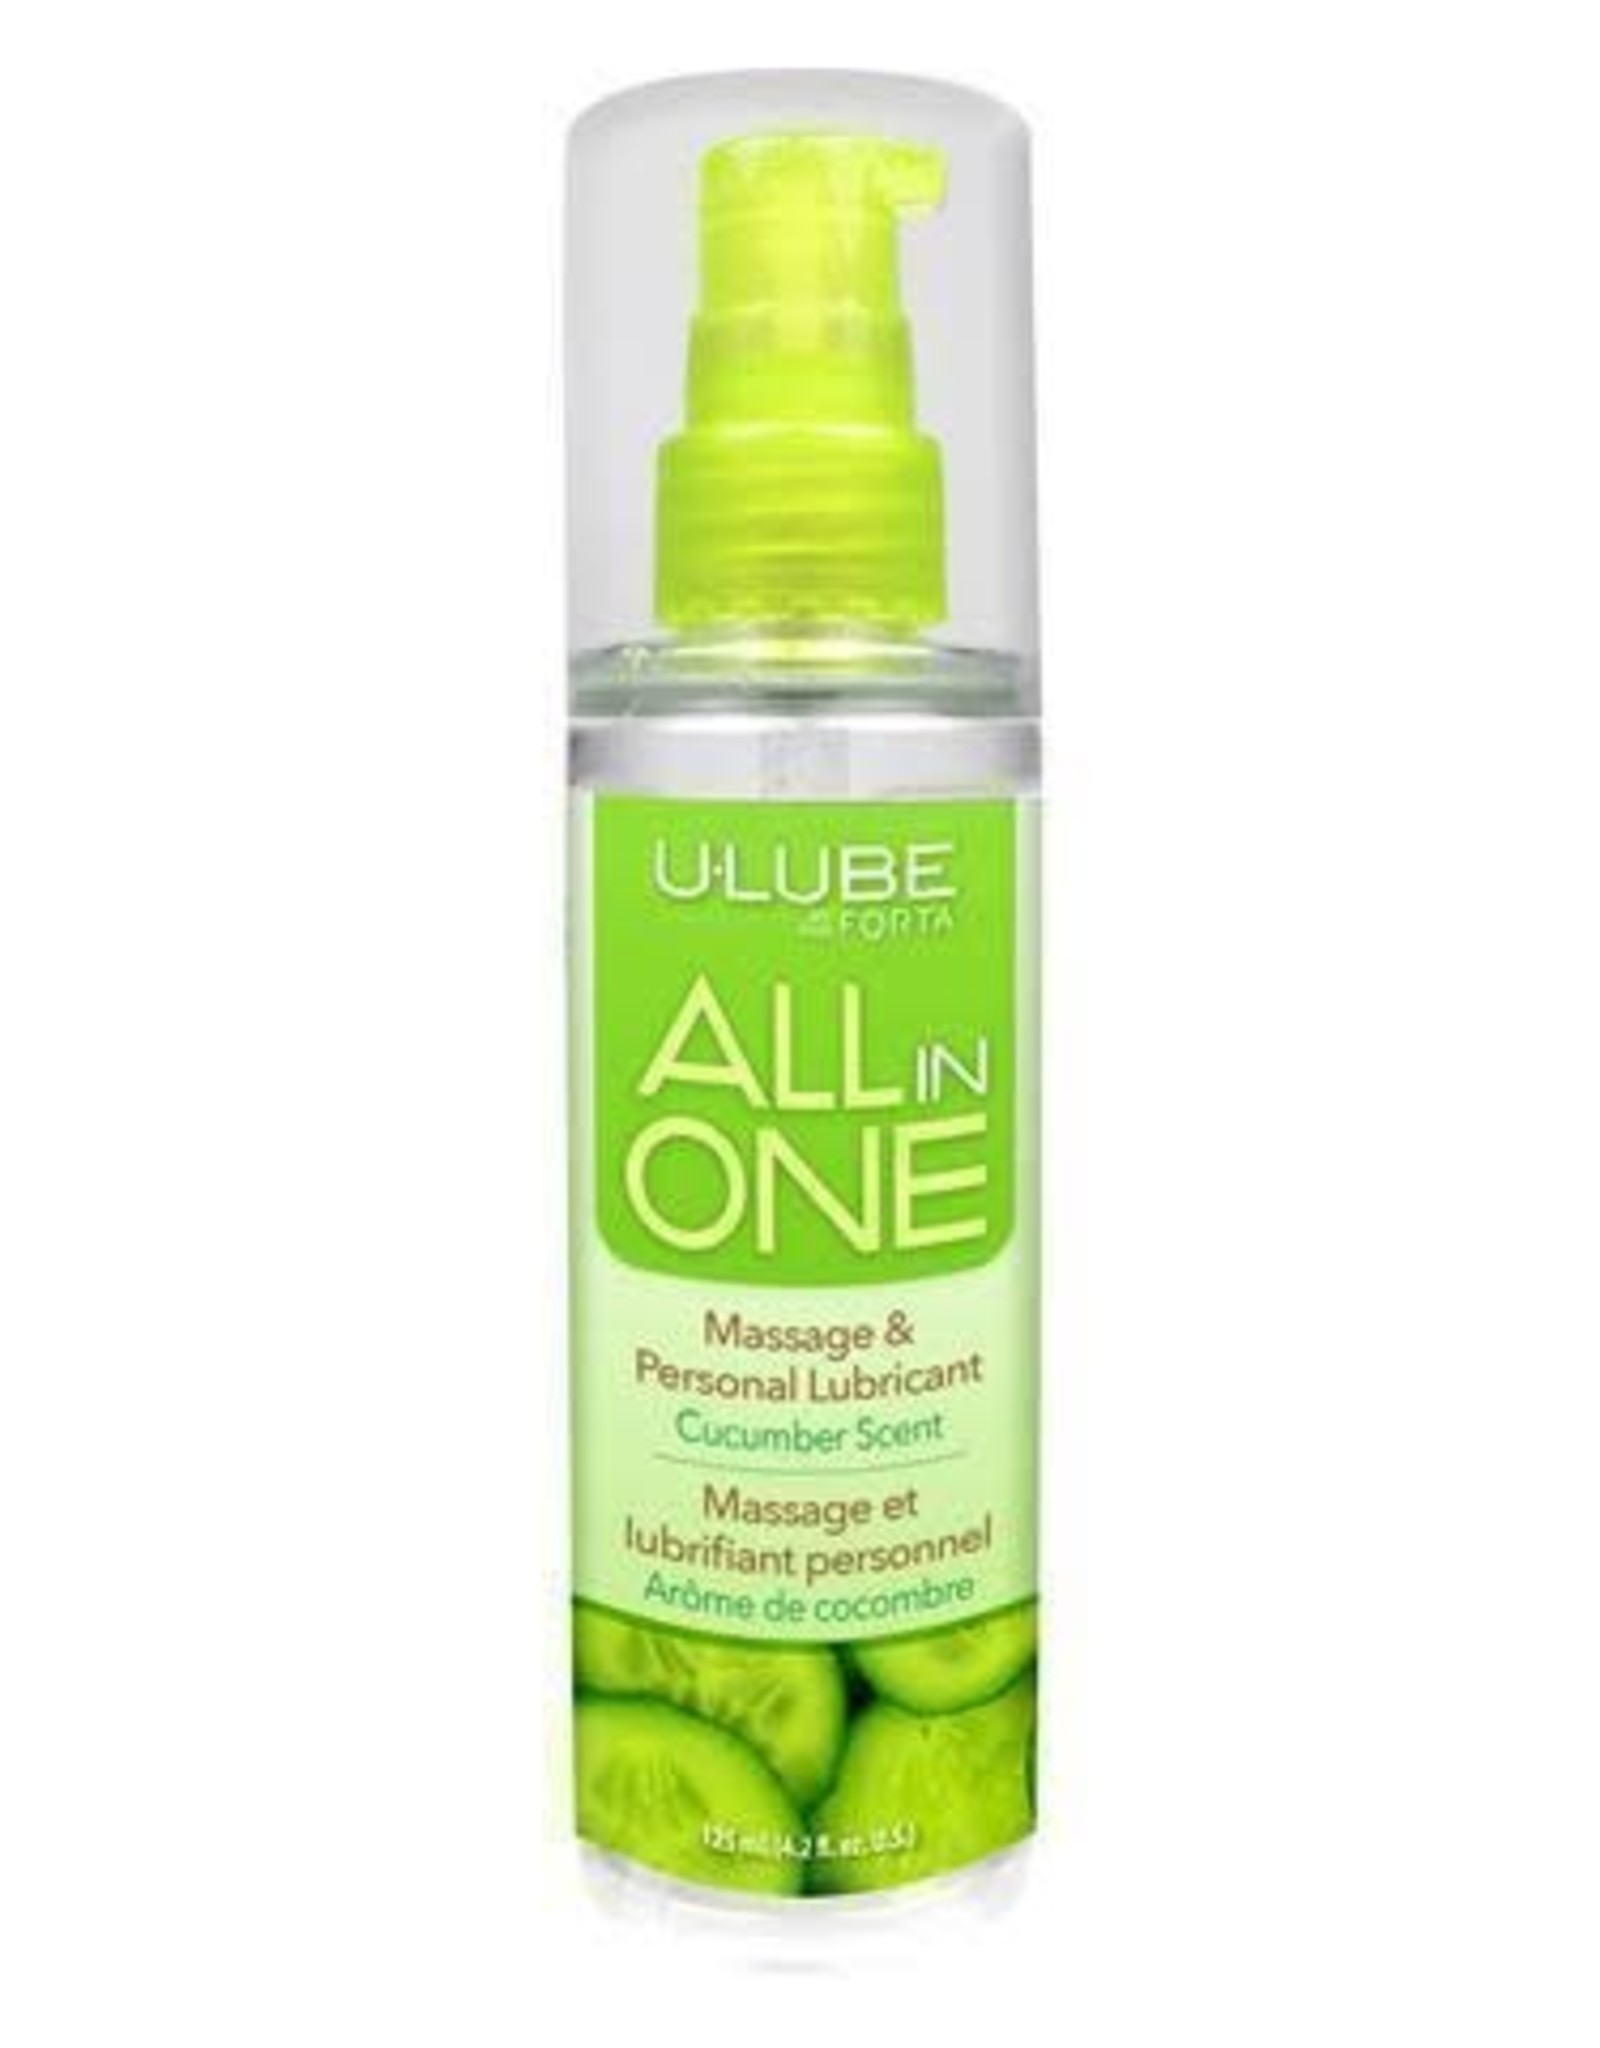 All in One Massage/Lubricant - Cucumber - 4 oz